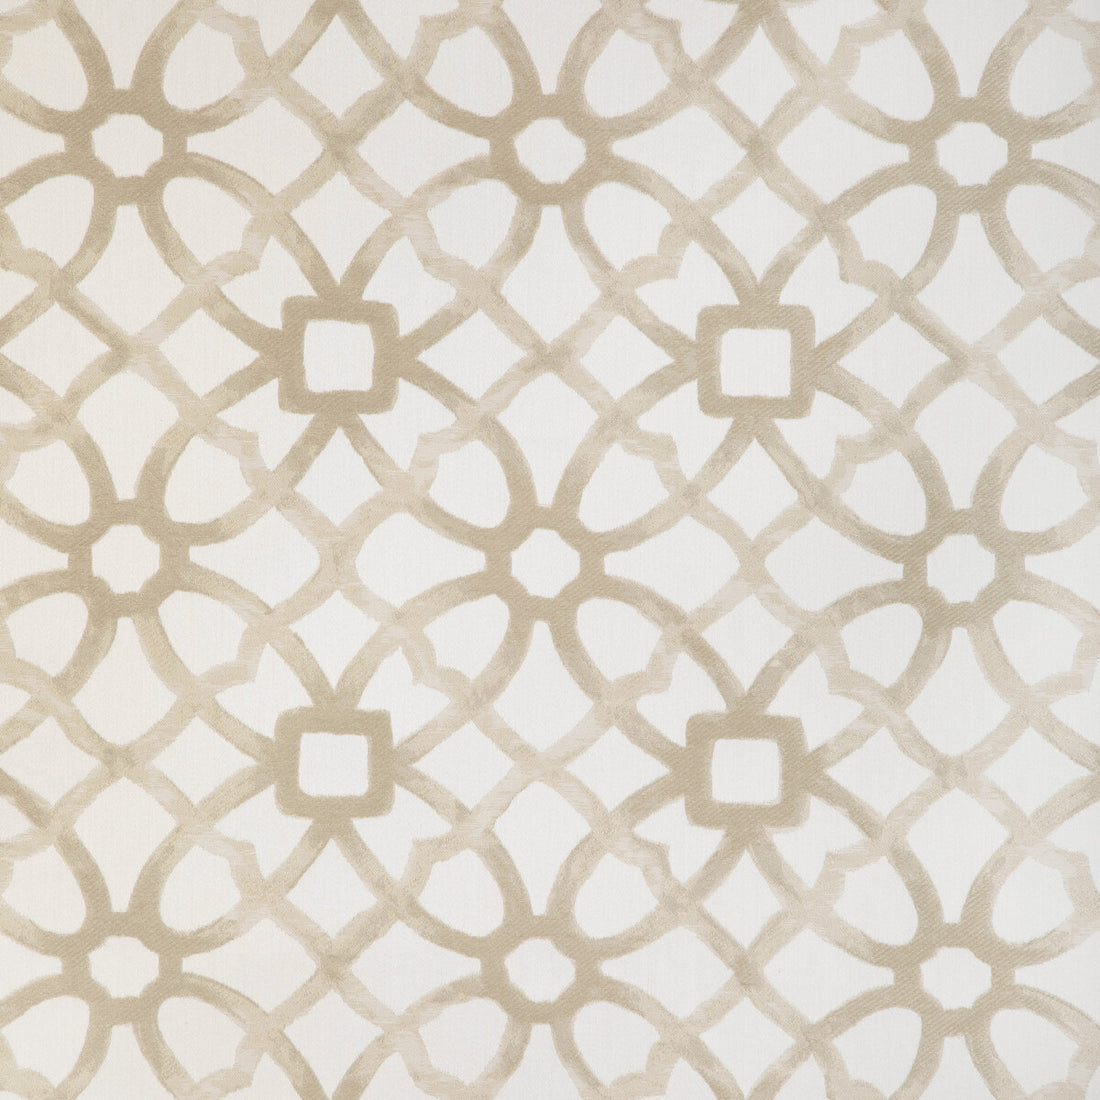 New Zuma fabric in dove color - pattern 36788.16.0 - by Kravet Design in the Candice Olson collection